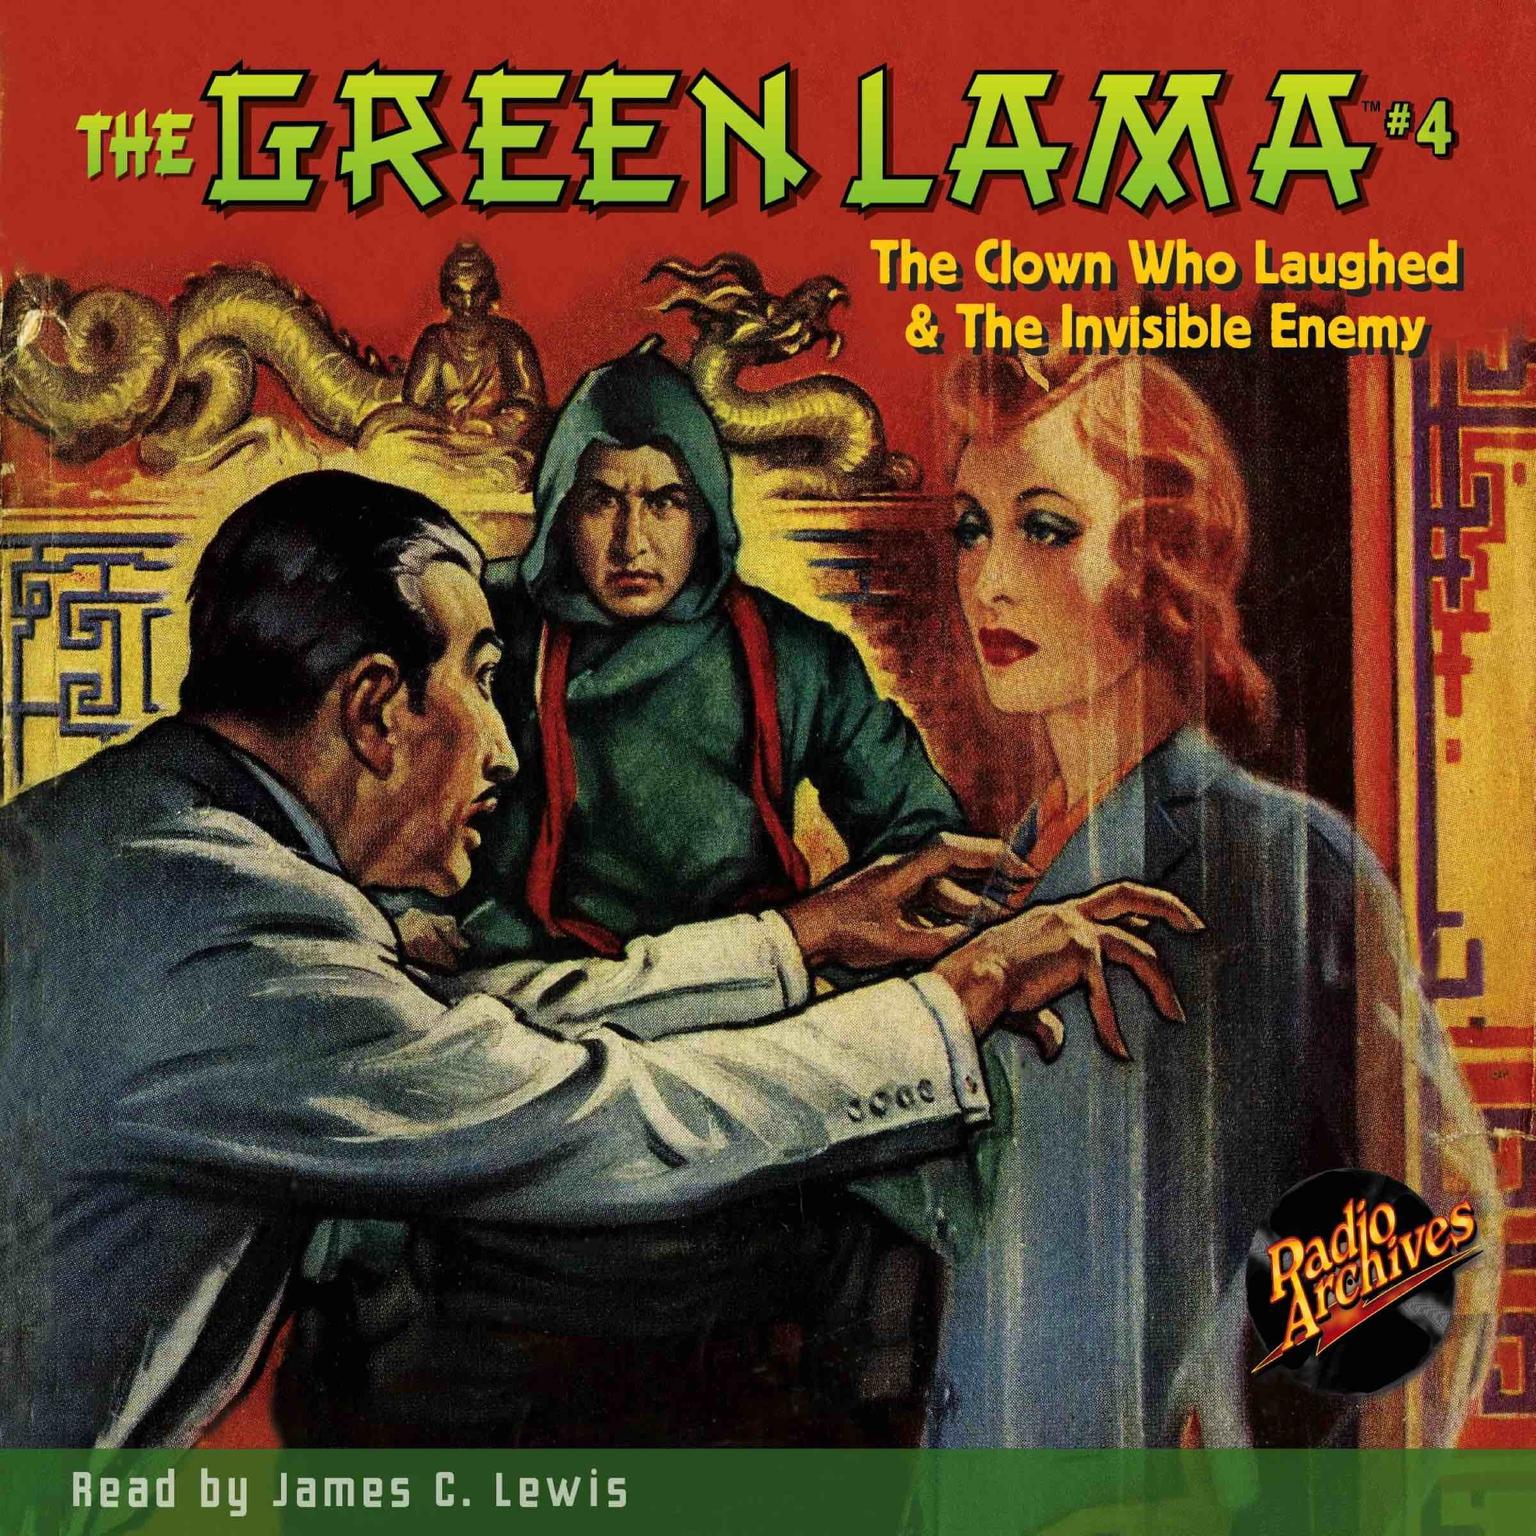 The Green Lama #4: The Clown Who Laughed & The Invisible Enemy Audiobook, by Richard Foster